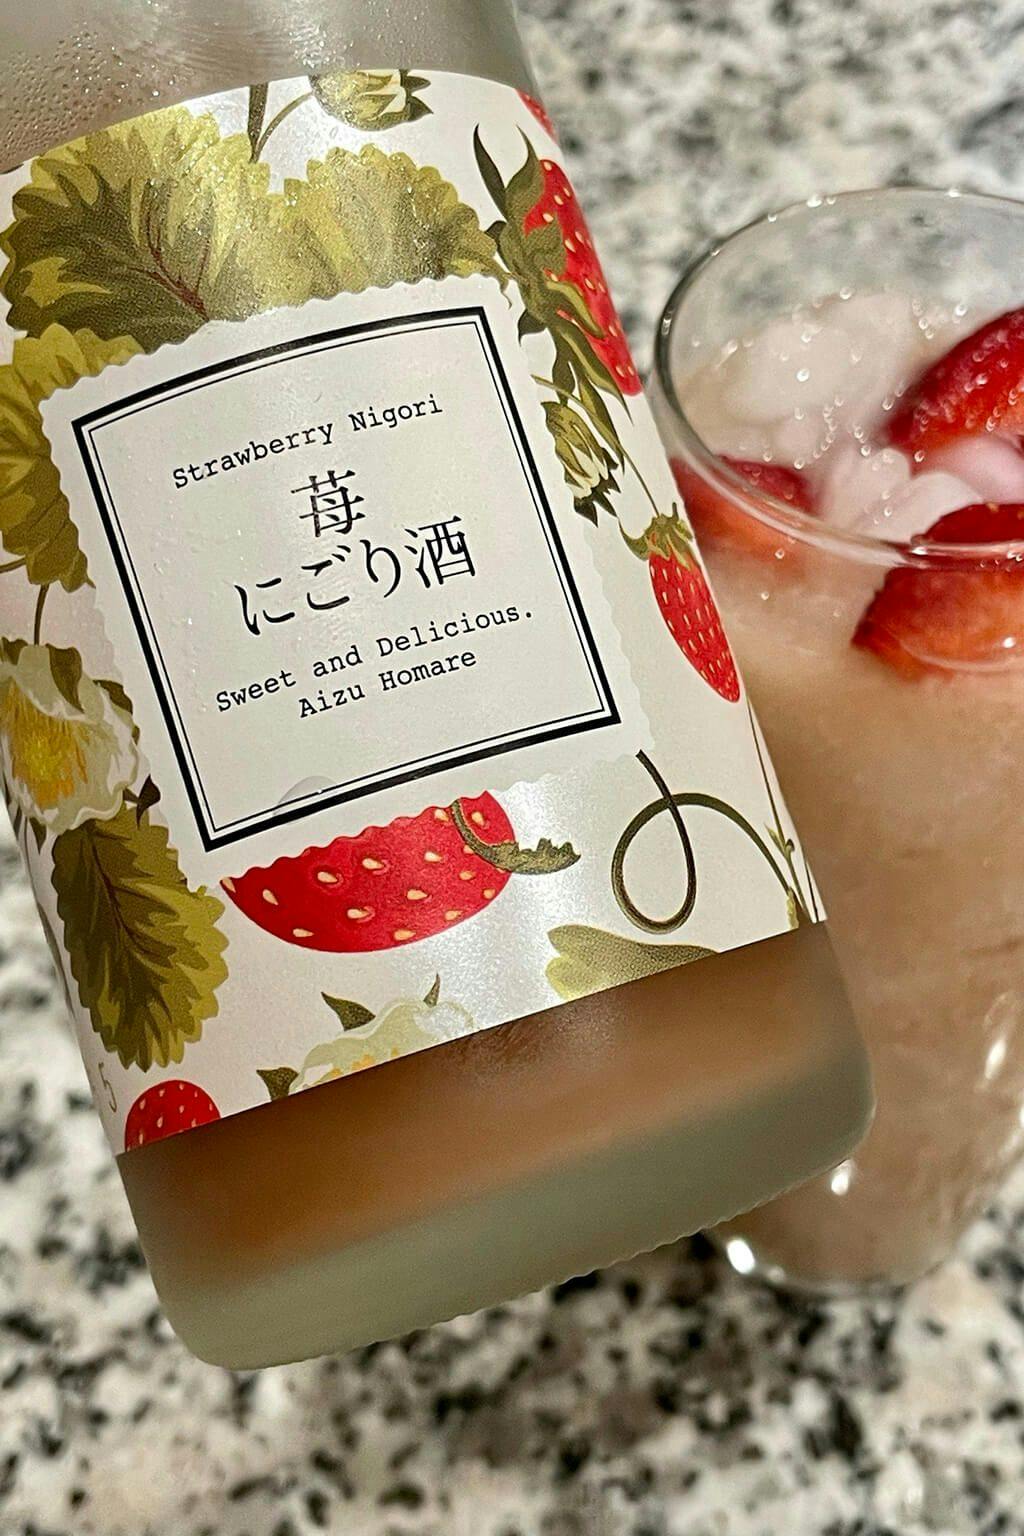 Homare “Strawberry” as a cocktail